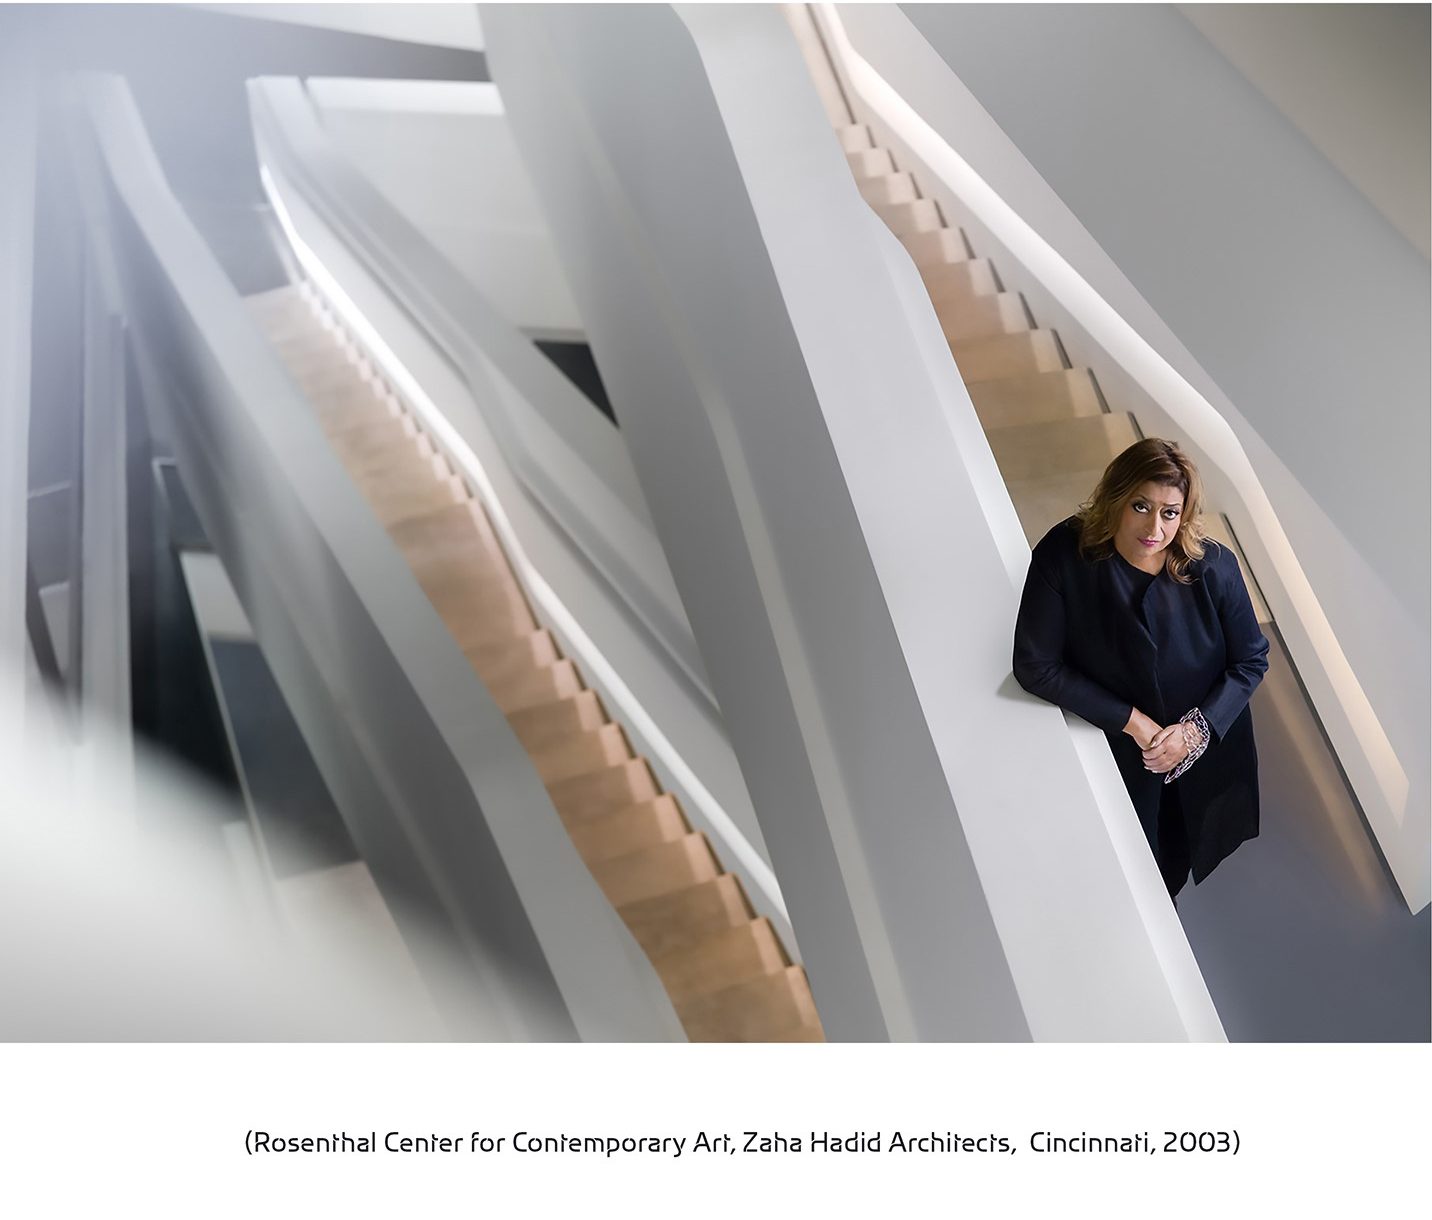 Archisearch Critic - post.critic, the trajectories of Zaha Hadid   |  Research thesis by Apostolia Michalou